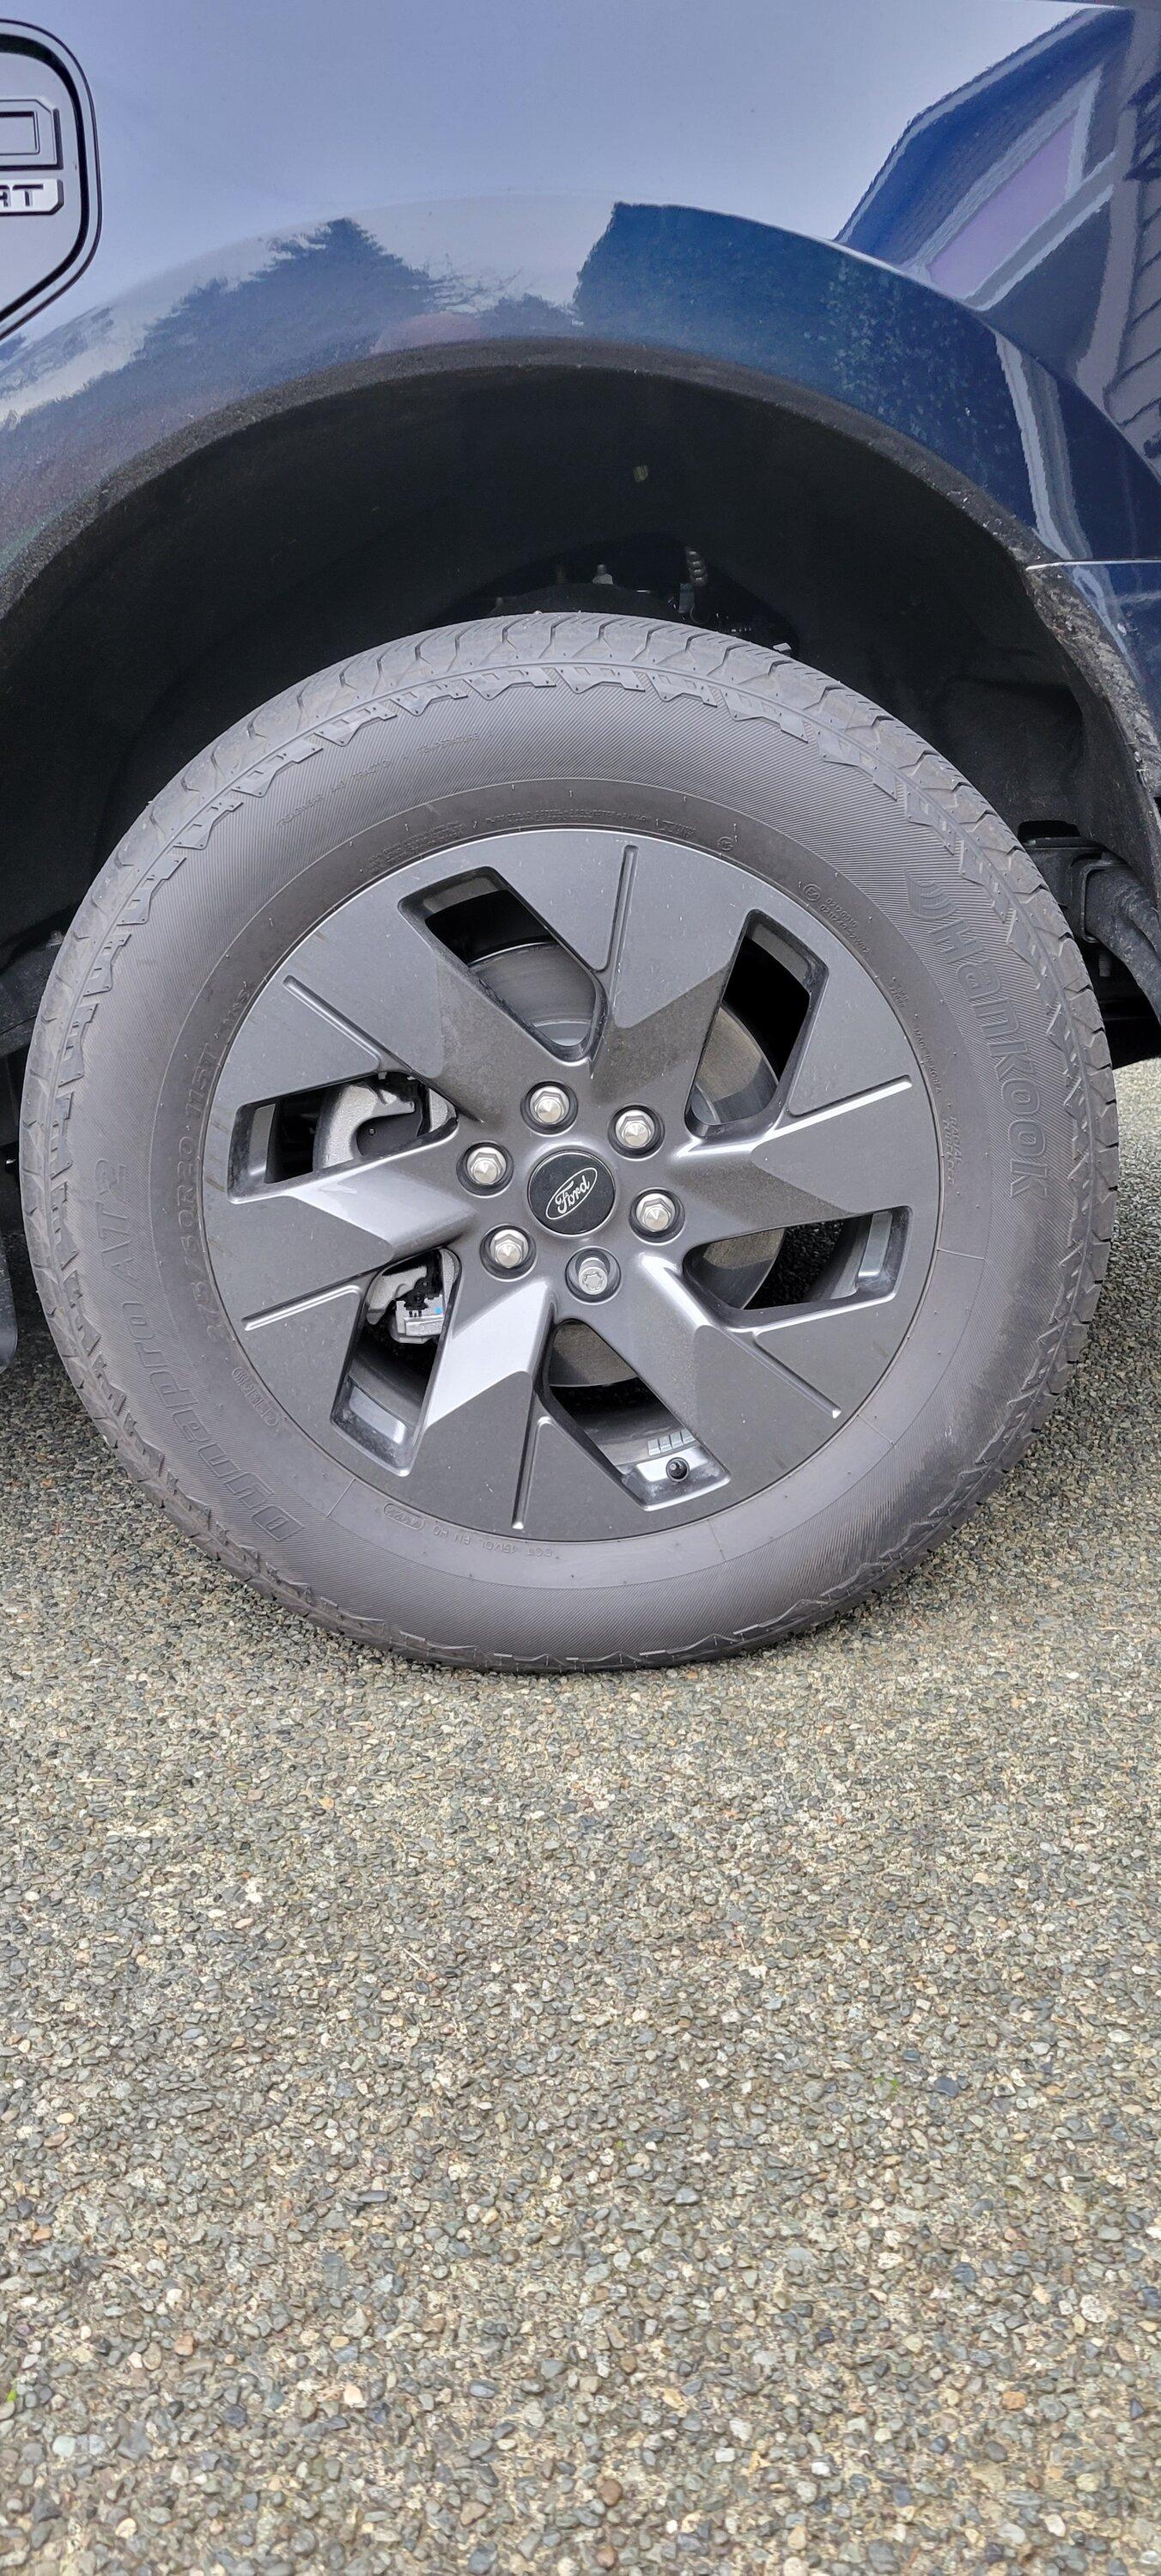 Ford F-150 Lightning Tire pressure recommendations? 20231213_100503